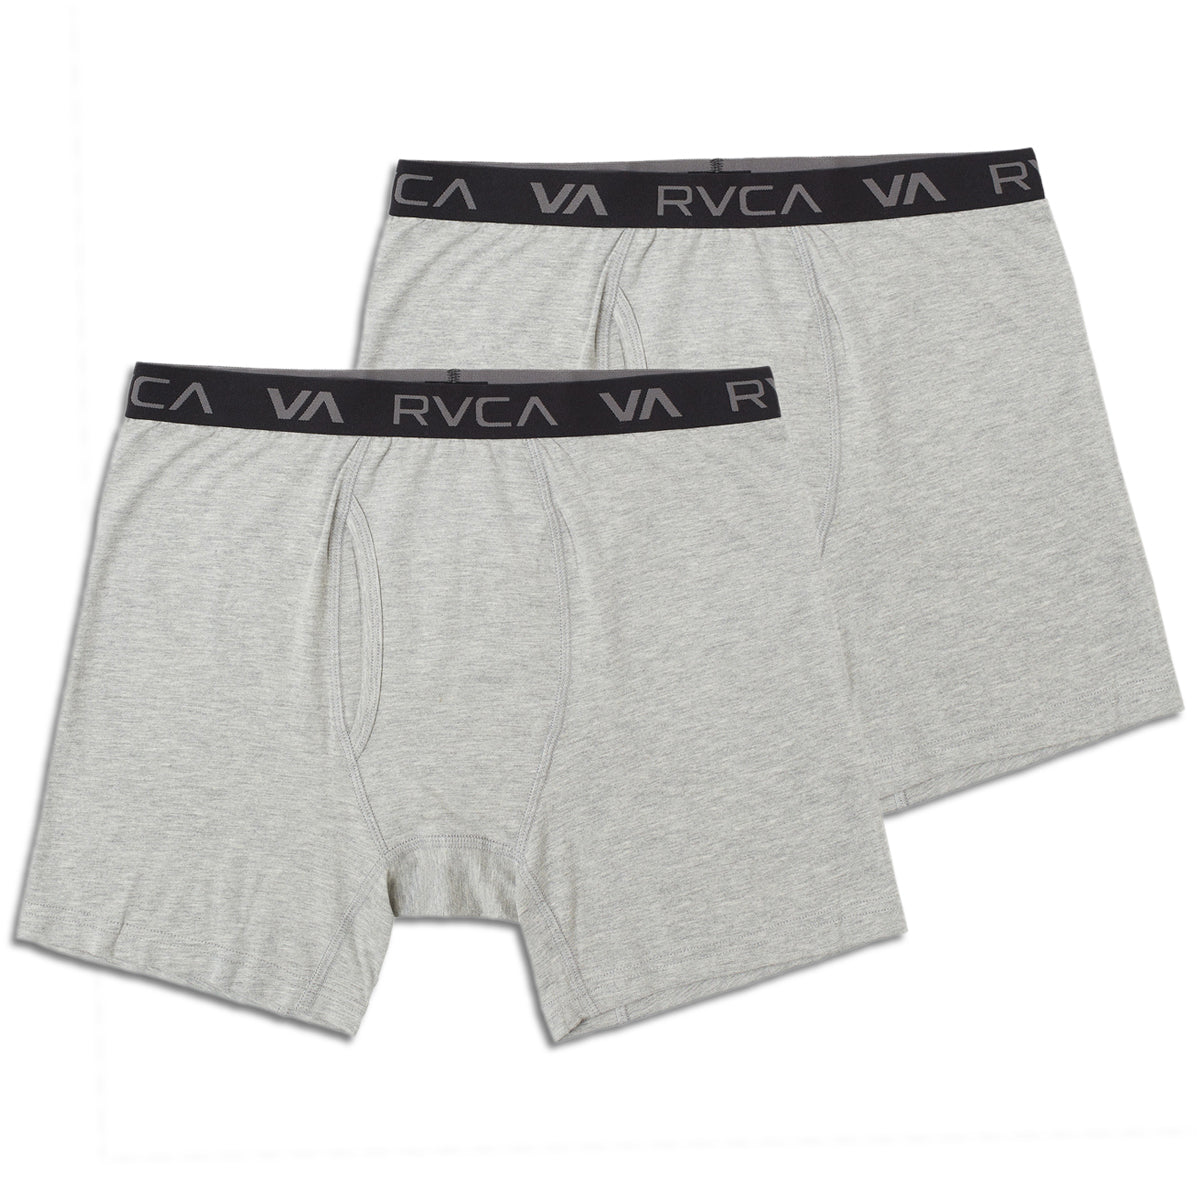 RVCA Core Super Soft 2 Pack of Boxer Brief - Light Grey Heather image 1